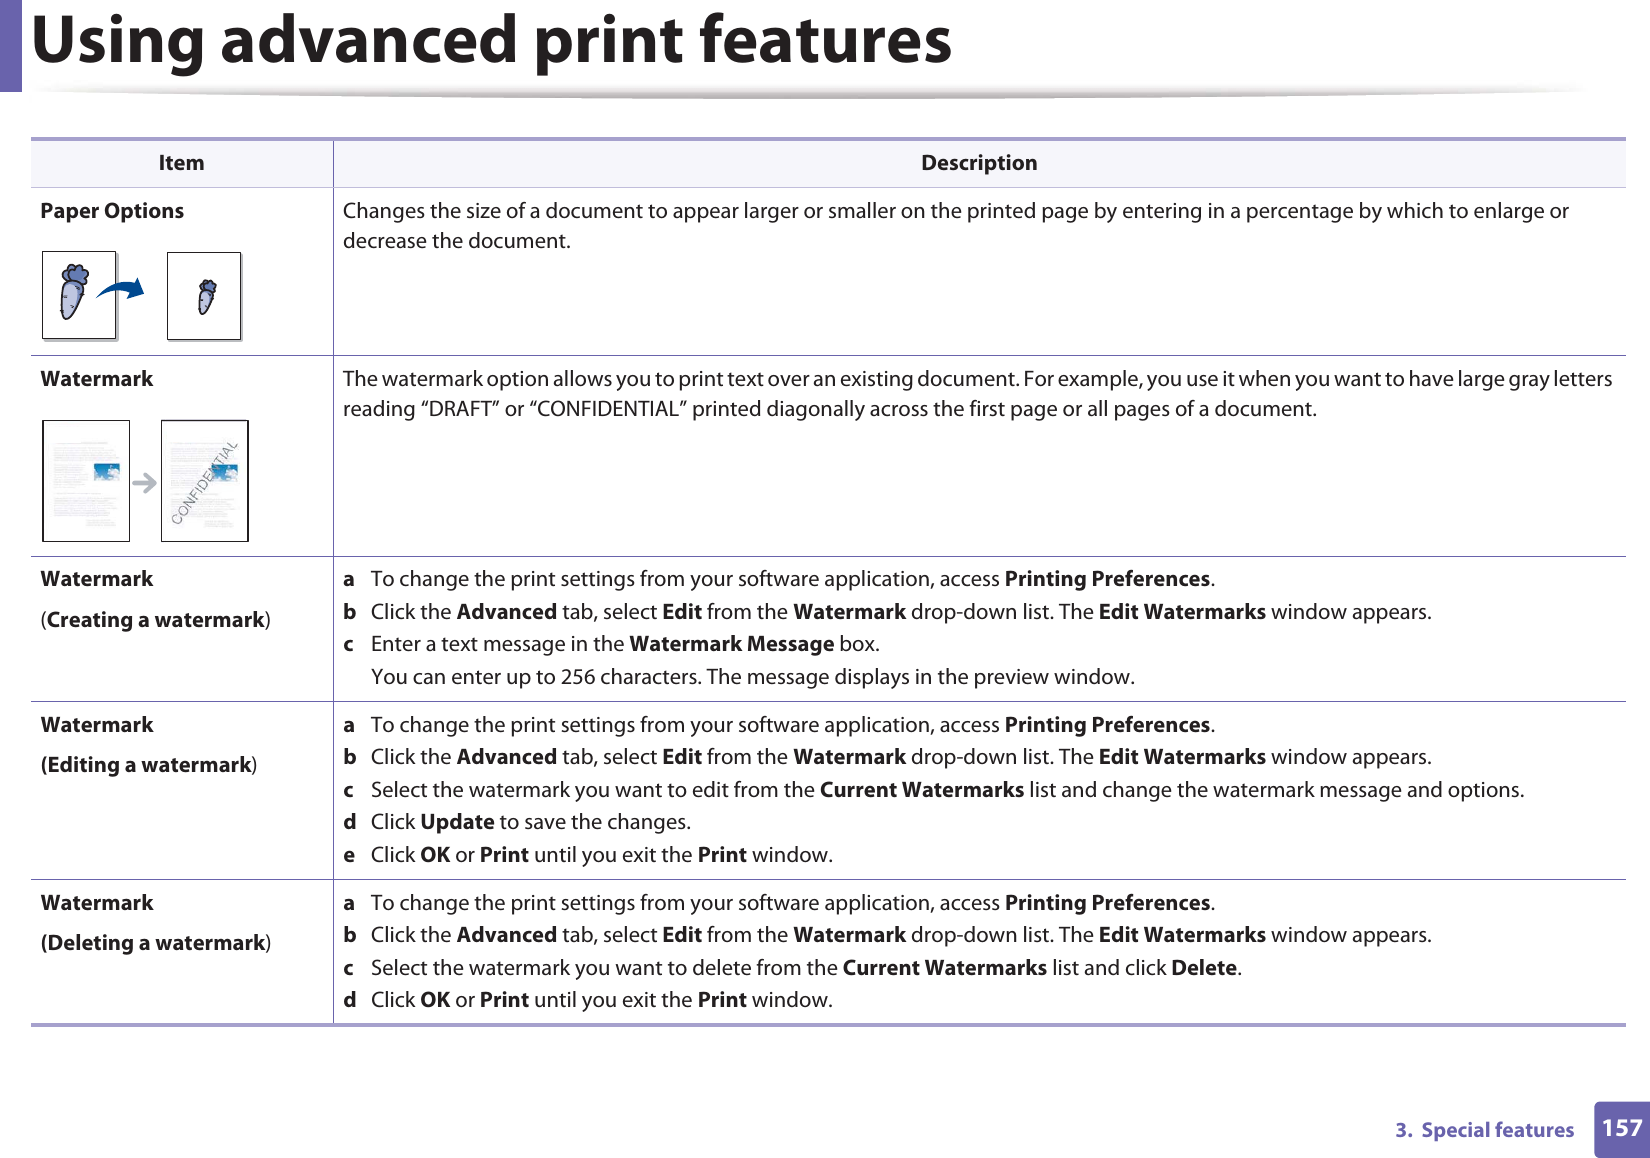 Using advanced print features1573.  Special featuresPaper Options Changes the size of a document to appear larger or smaller on the printed page by entering in a percentage by which to enlarge or decrease the document.Watermark The watermark option allows you to print text over an existing document. For example, you use it when you want to have large gray letters reading “DRAFT” or “CONFIDENTIAL” printed diagonally across the first page or all pages of a document. Watermark(Creating a watermark)a  To change the print settings from your software application, access Printing Preferences.b  Click the Advanced tab, select Edit from the Watermark drop-down list. The Edit Watermarks window appears.c  Enter a text message in the Watermark Message box. You can enter up to 256 characters. The message displays in the preview window.Watermark(Editing a watermark)a  To change the print settings from your software application, access Printing Preferences.b  Click the Advanced tab, select Edit from the Watermark drop-down list. The Edit Watermarks window appears. c  Select the watermark you want to edit from the Current Watermarks list and change the watermark message and options. d  Click Update to save the changes.e  Click OK or Print until you exit the Print window. Watermark(Deleting a watermark)a  To change the print settings from your software application, access Printing Preferences.b  Click the Advanced tab, select Edit from the Watermark drop-down list. The Edit Watermarks window appears. c  Select the watermark you want to delete from the Current Watermarks list and click Delete. d  Click OK or Print until you exit the Print window.Item Description